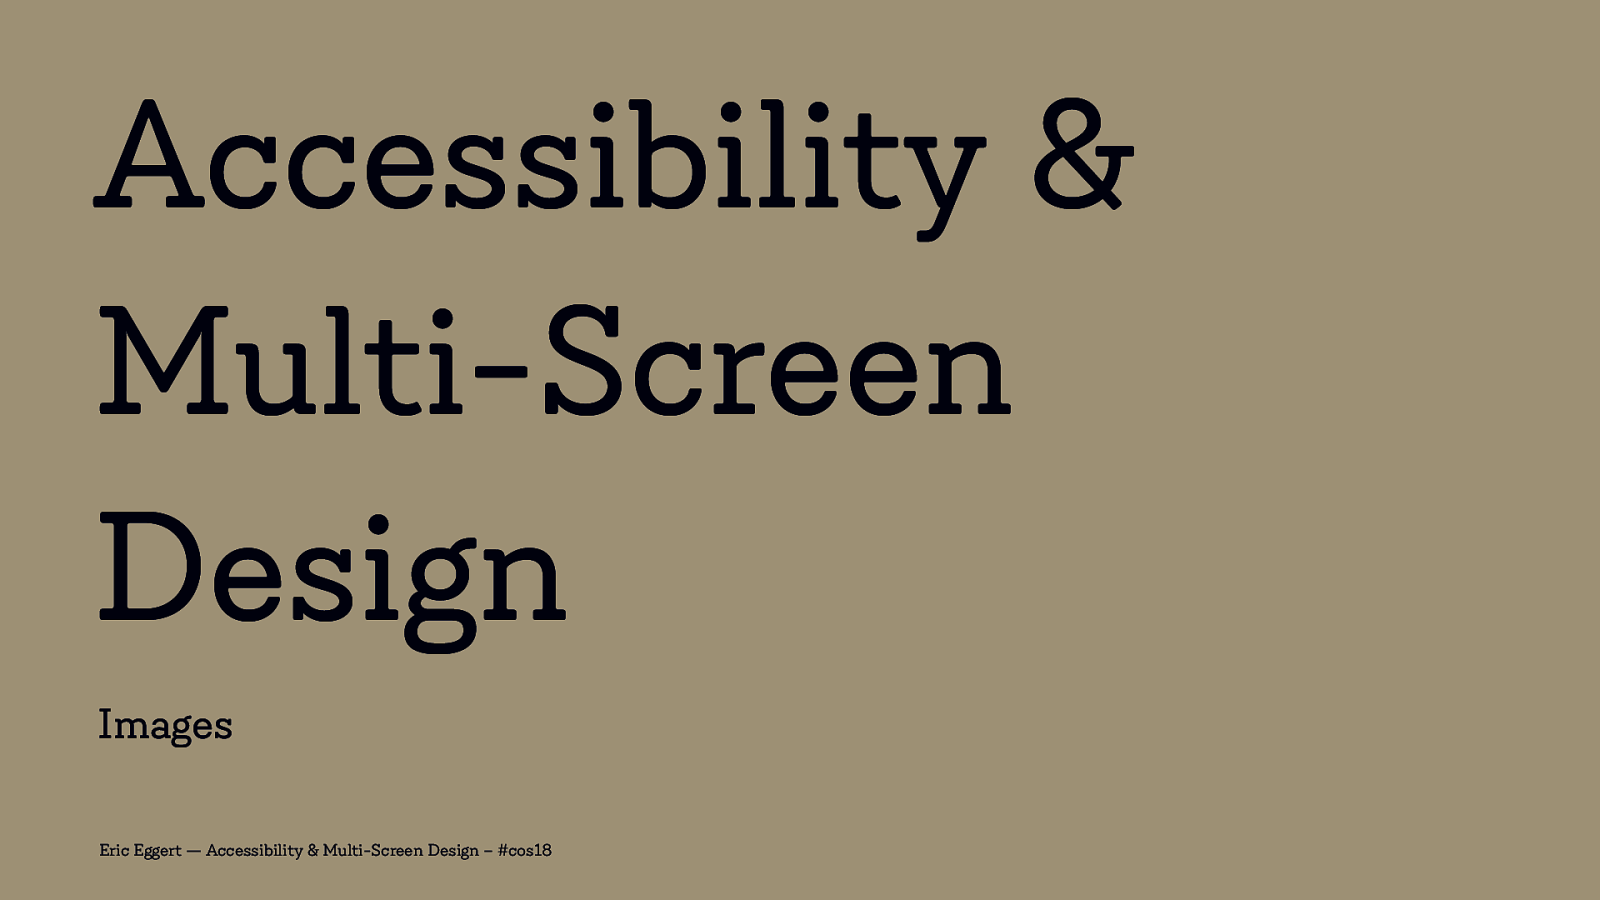 Accessibility & Multi-Screen Design: Images